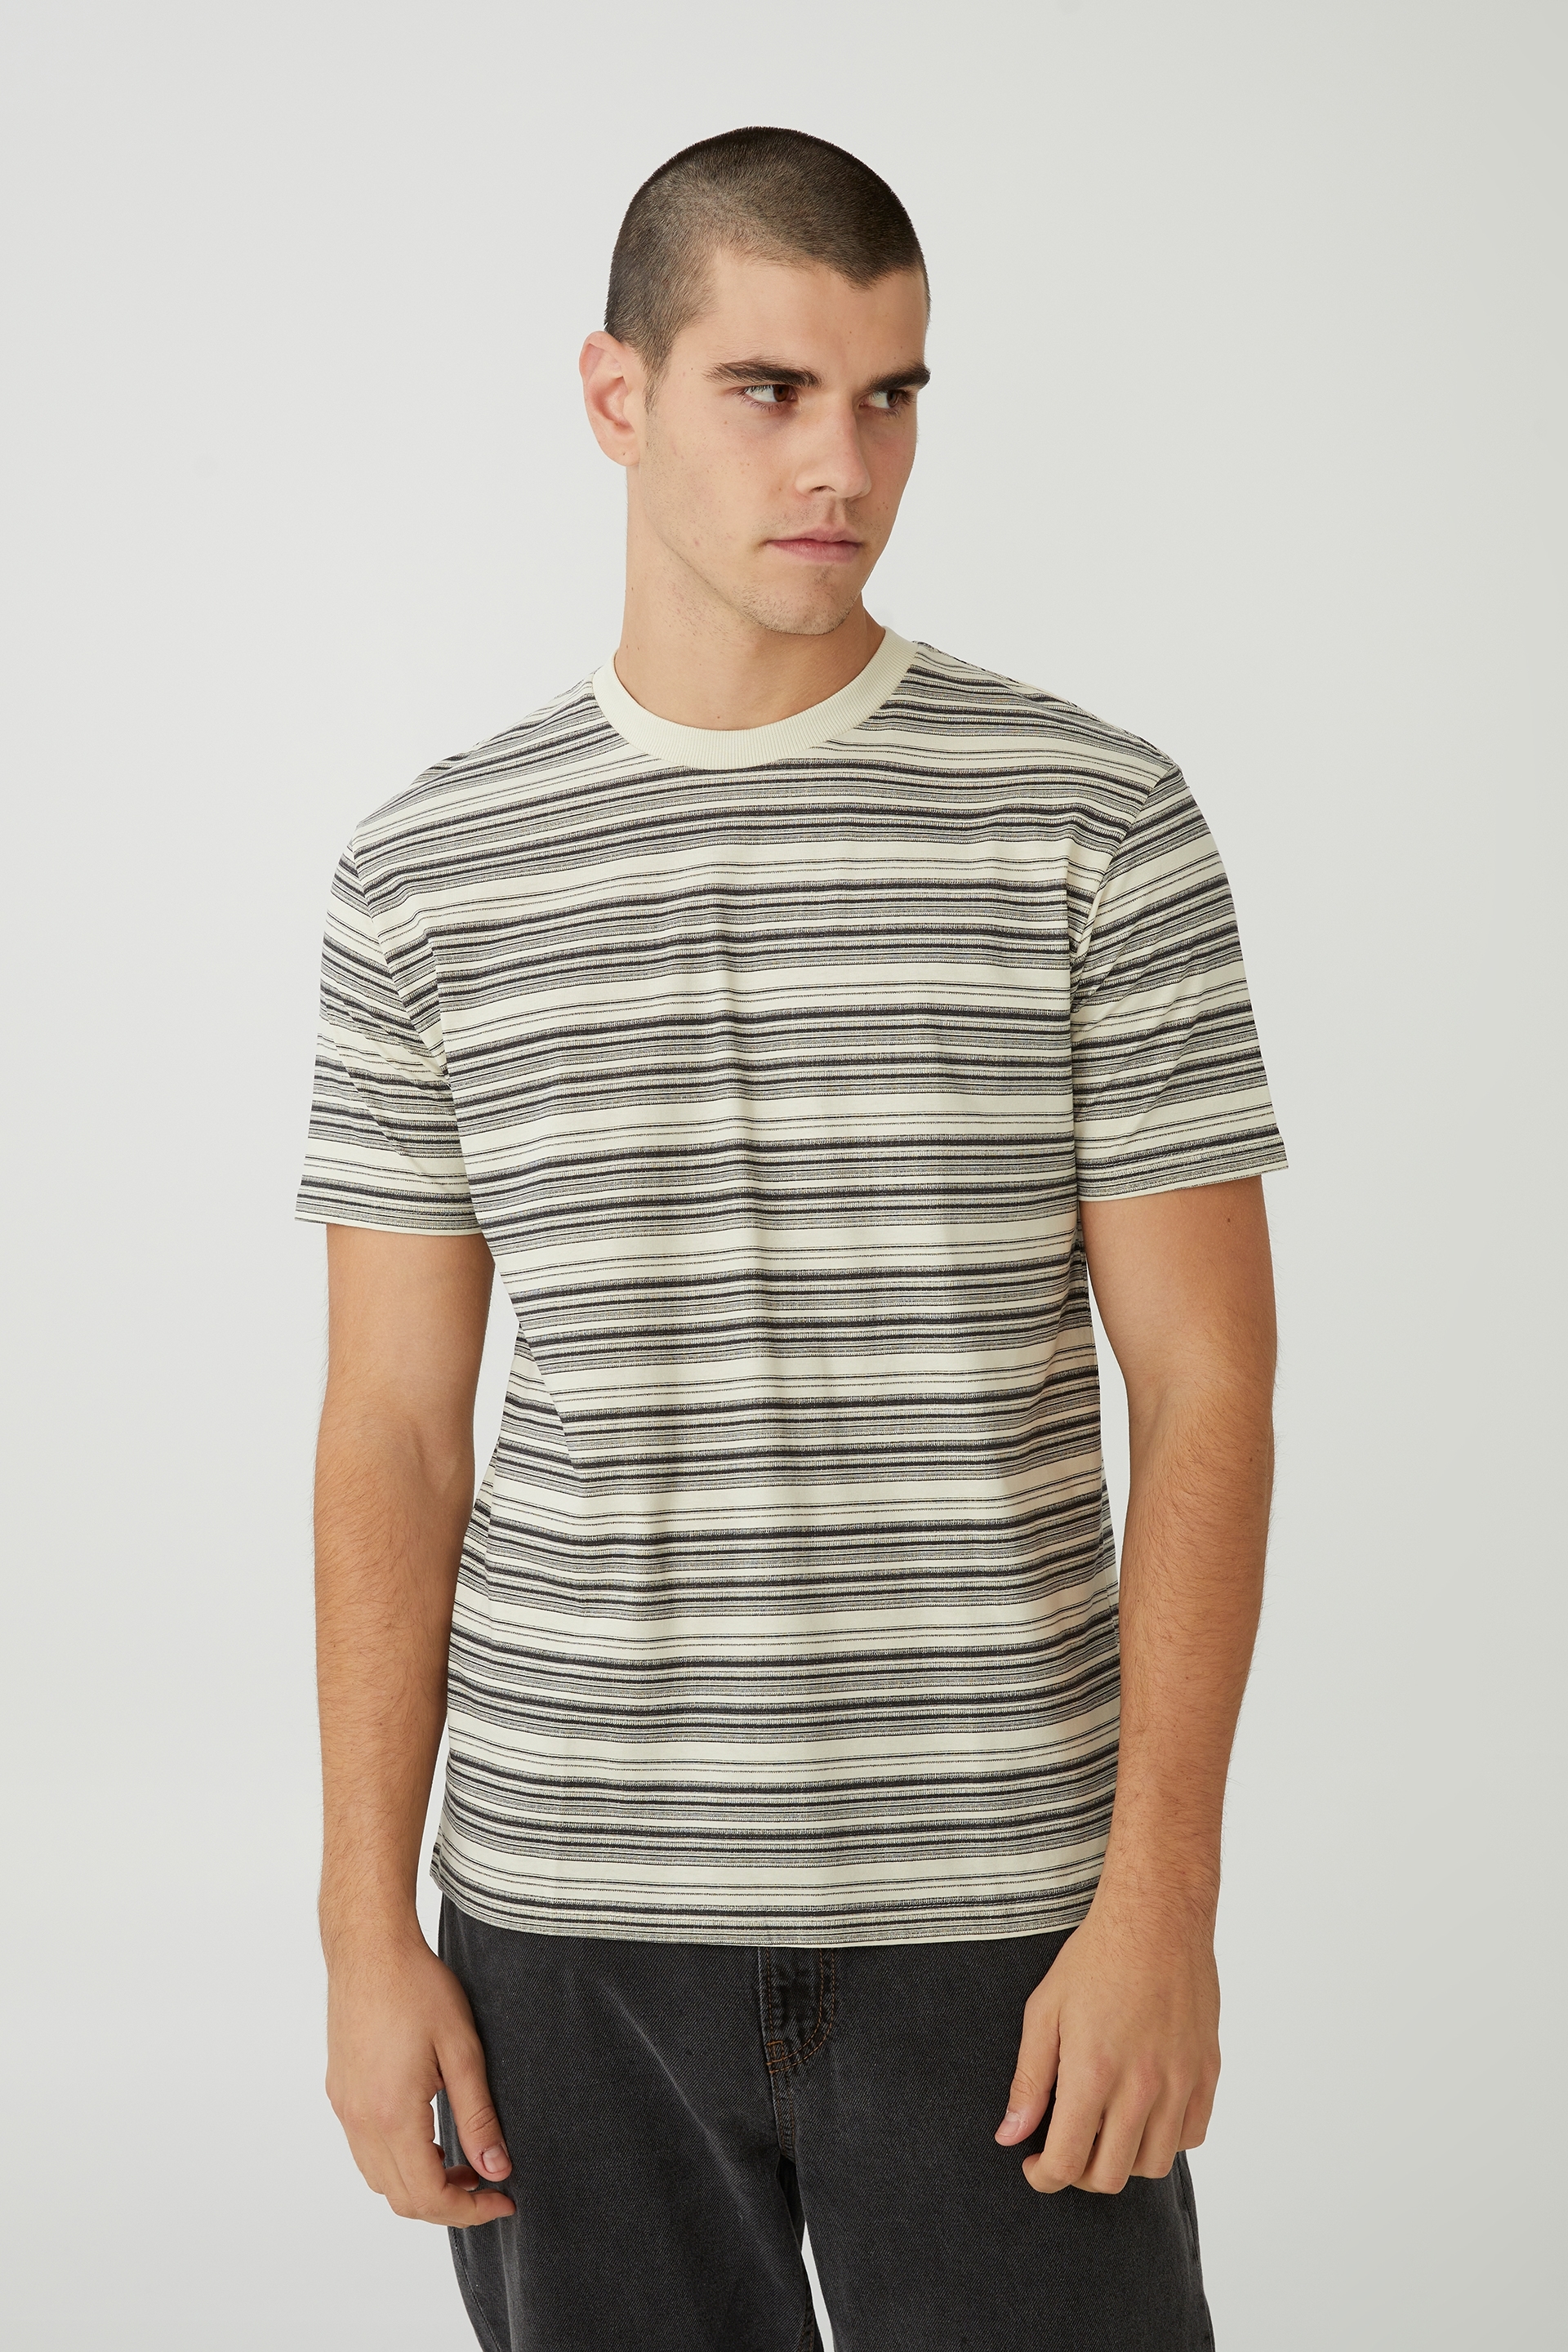 Cotton On Men - Loose Fit T-Shirt - Ivory/textured stripe